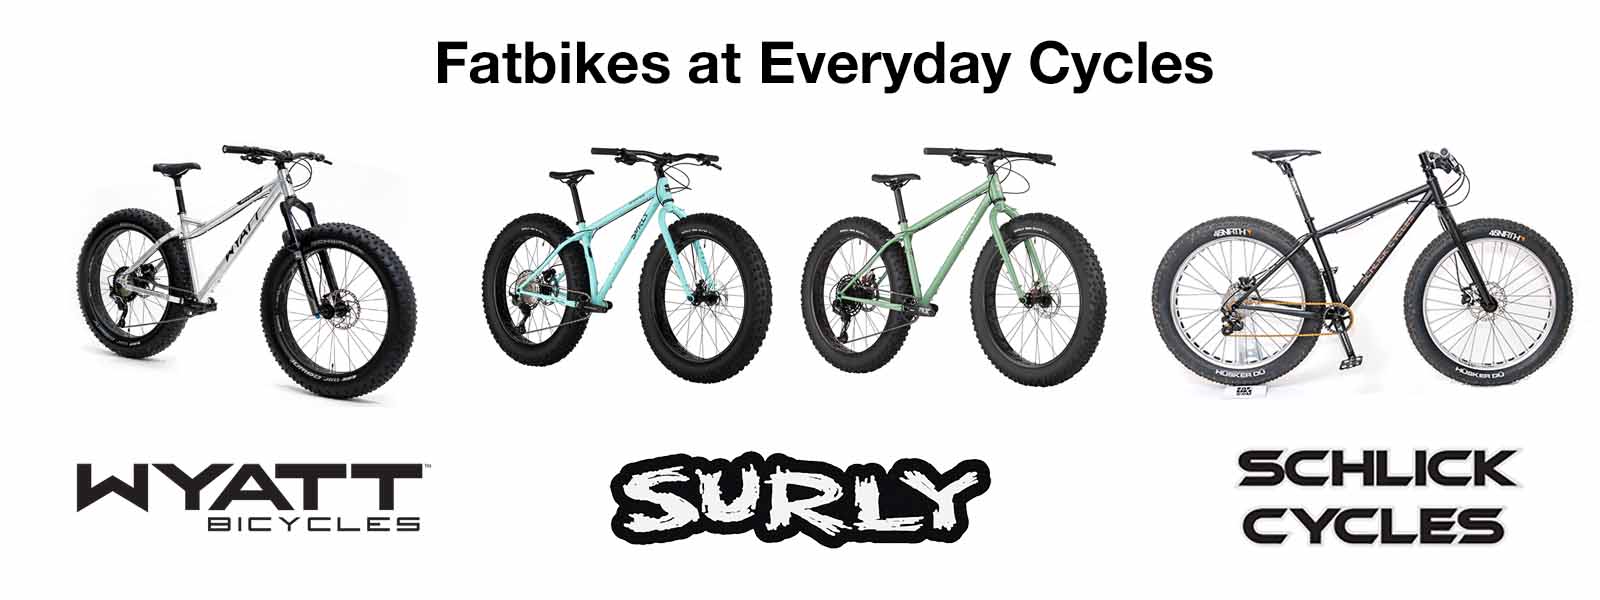 Taiko buik kussen verkeer Fatbikes From Surly, Wyatt and Schlick Cycles Available Now at Everyda -  Everyday Cycles LLC